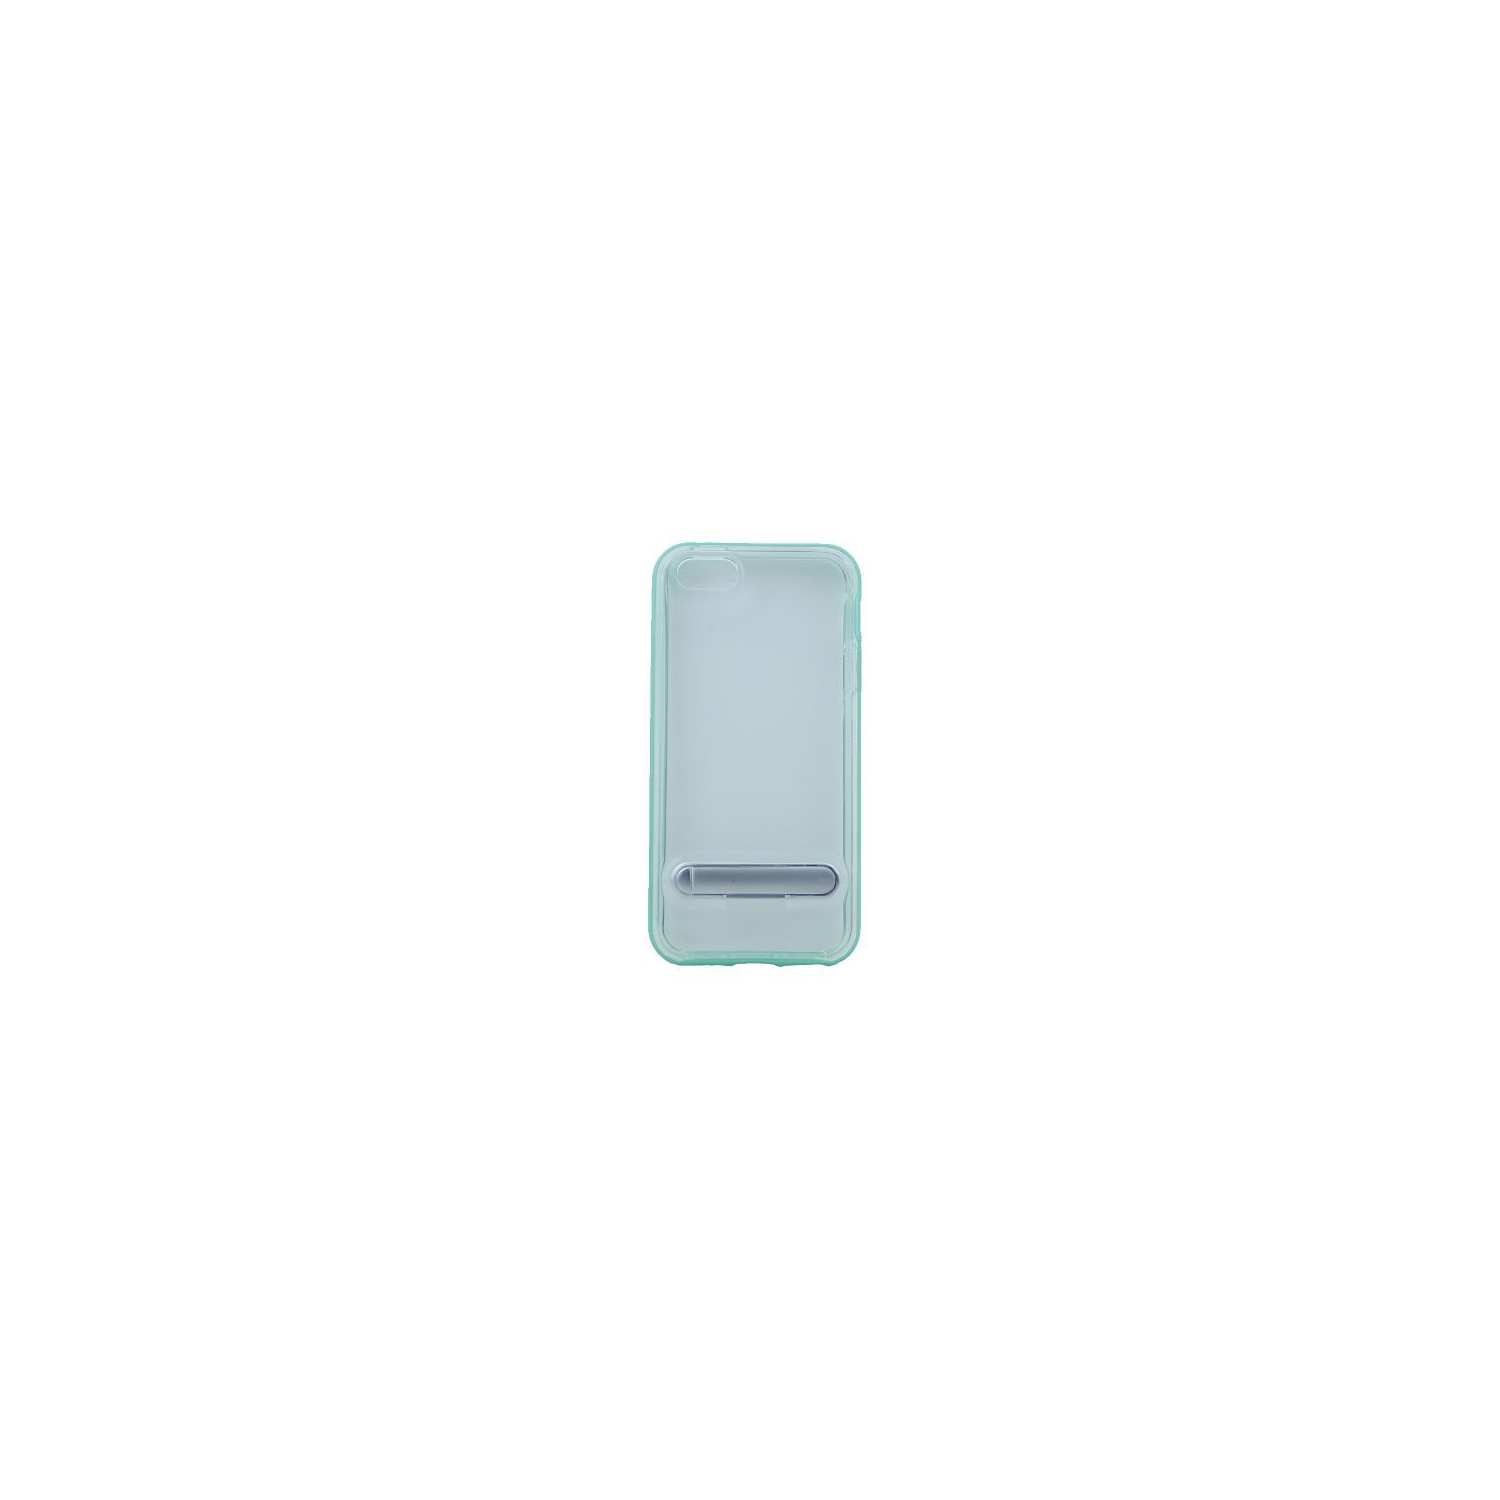 No Package will be included Slim clear tpu+hard frame rubber bumper for Iphone 5/S/SE(2016) with kickstand, Teal